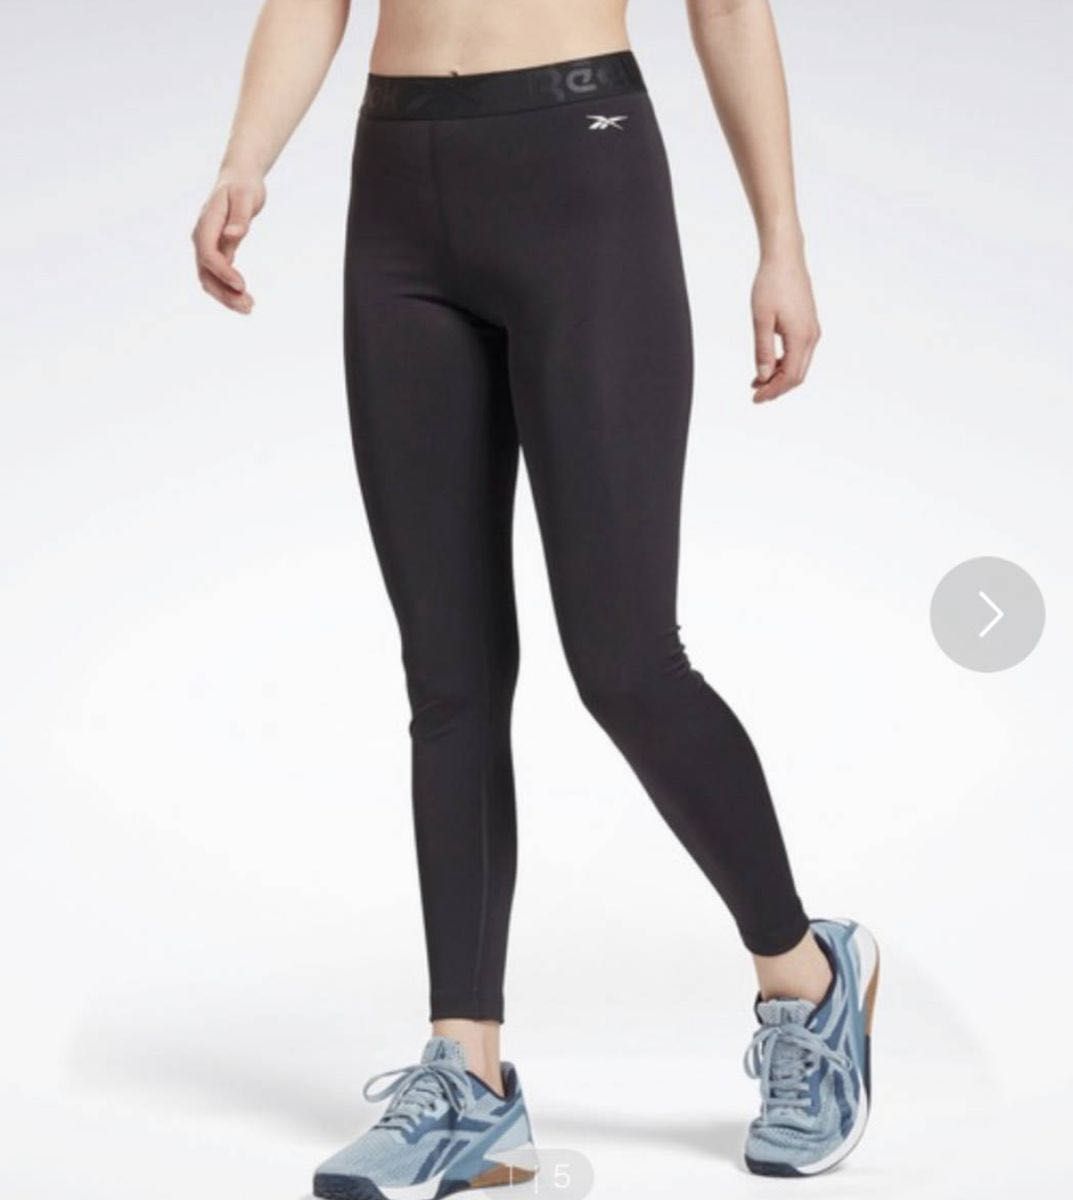 【Reebok】ワークアウト レディ コマーシャル タイツ [Workout Ready Commercial Tights...